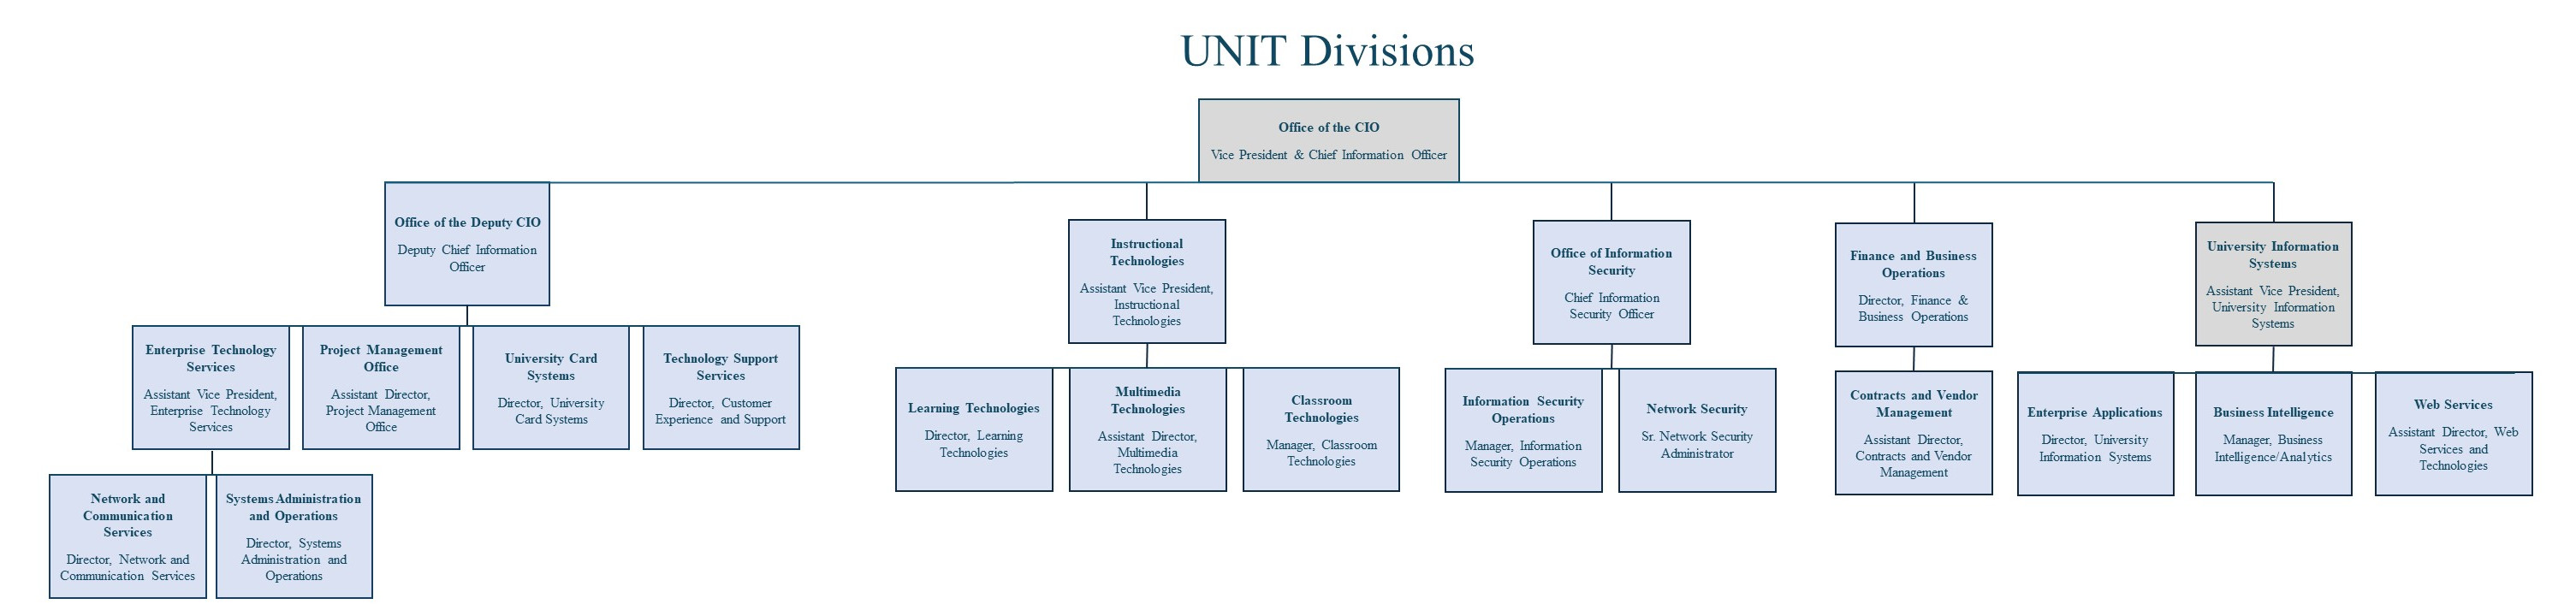 A visual representation of UNIT Divisions also represented by text below.